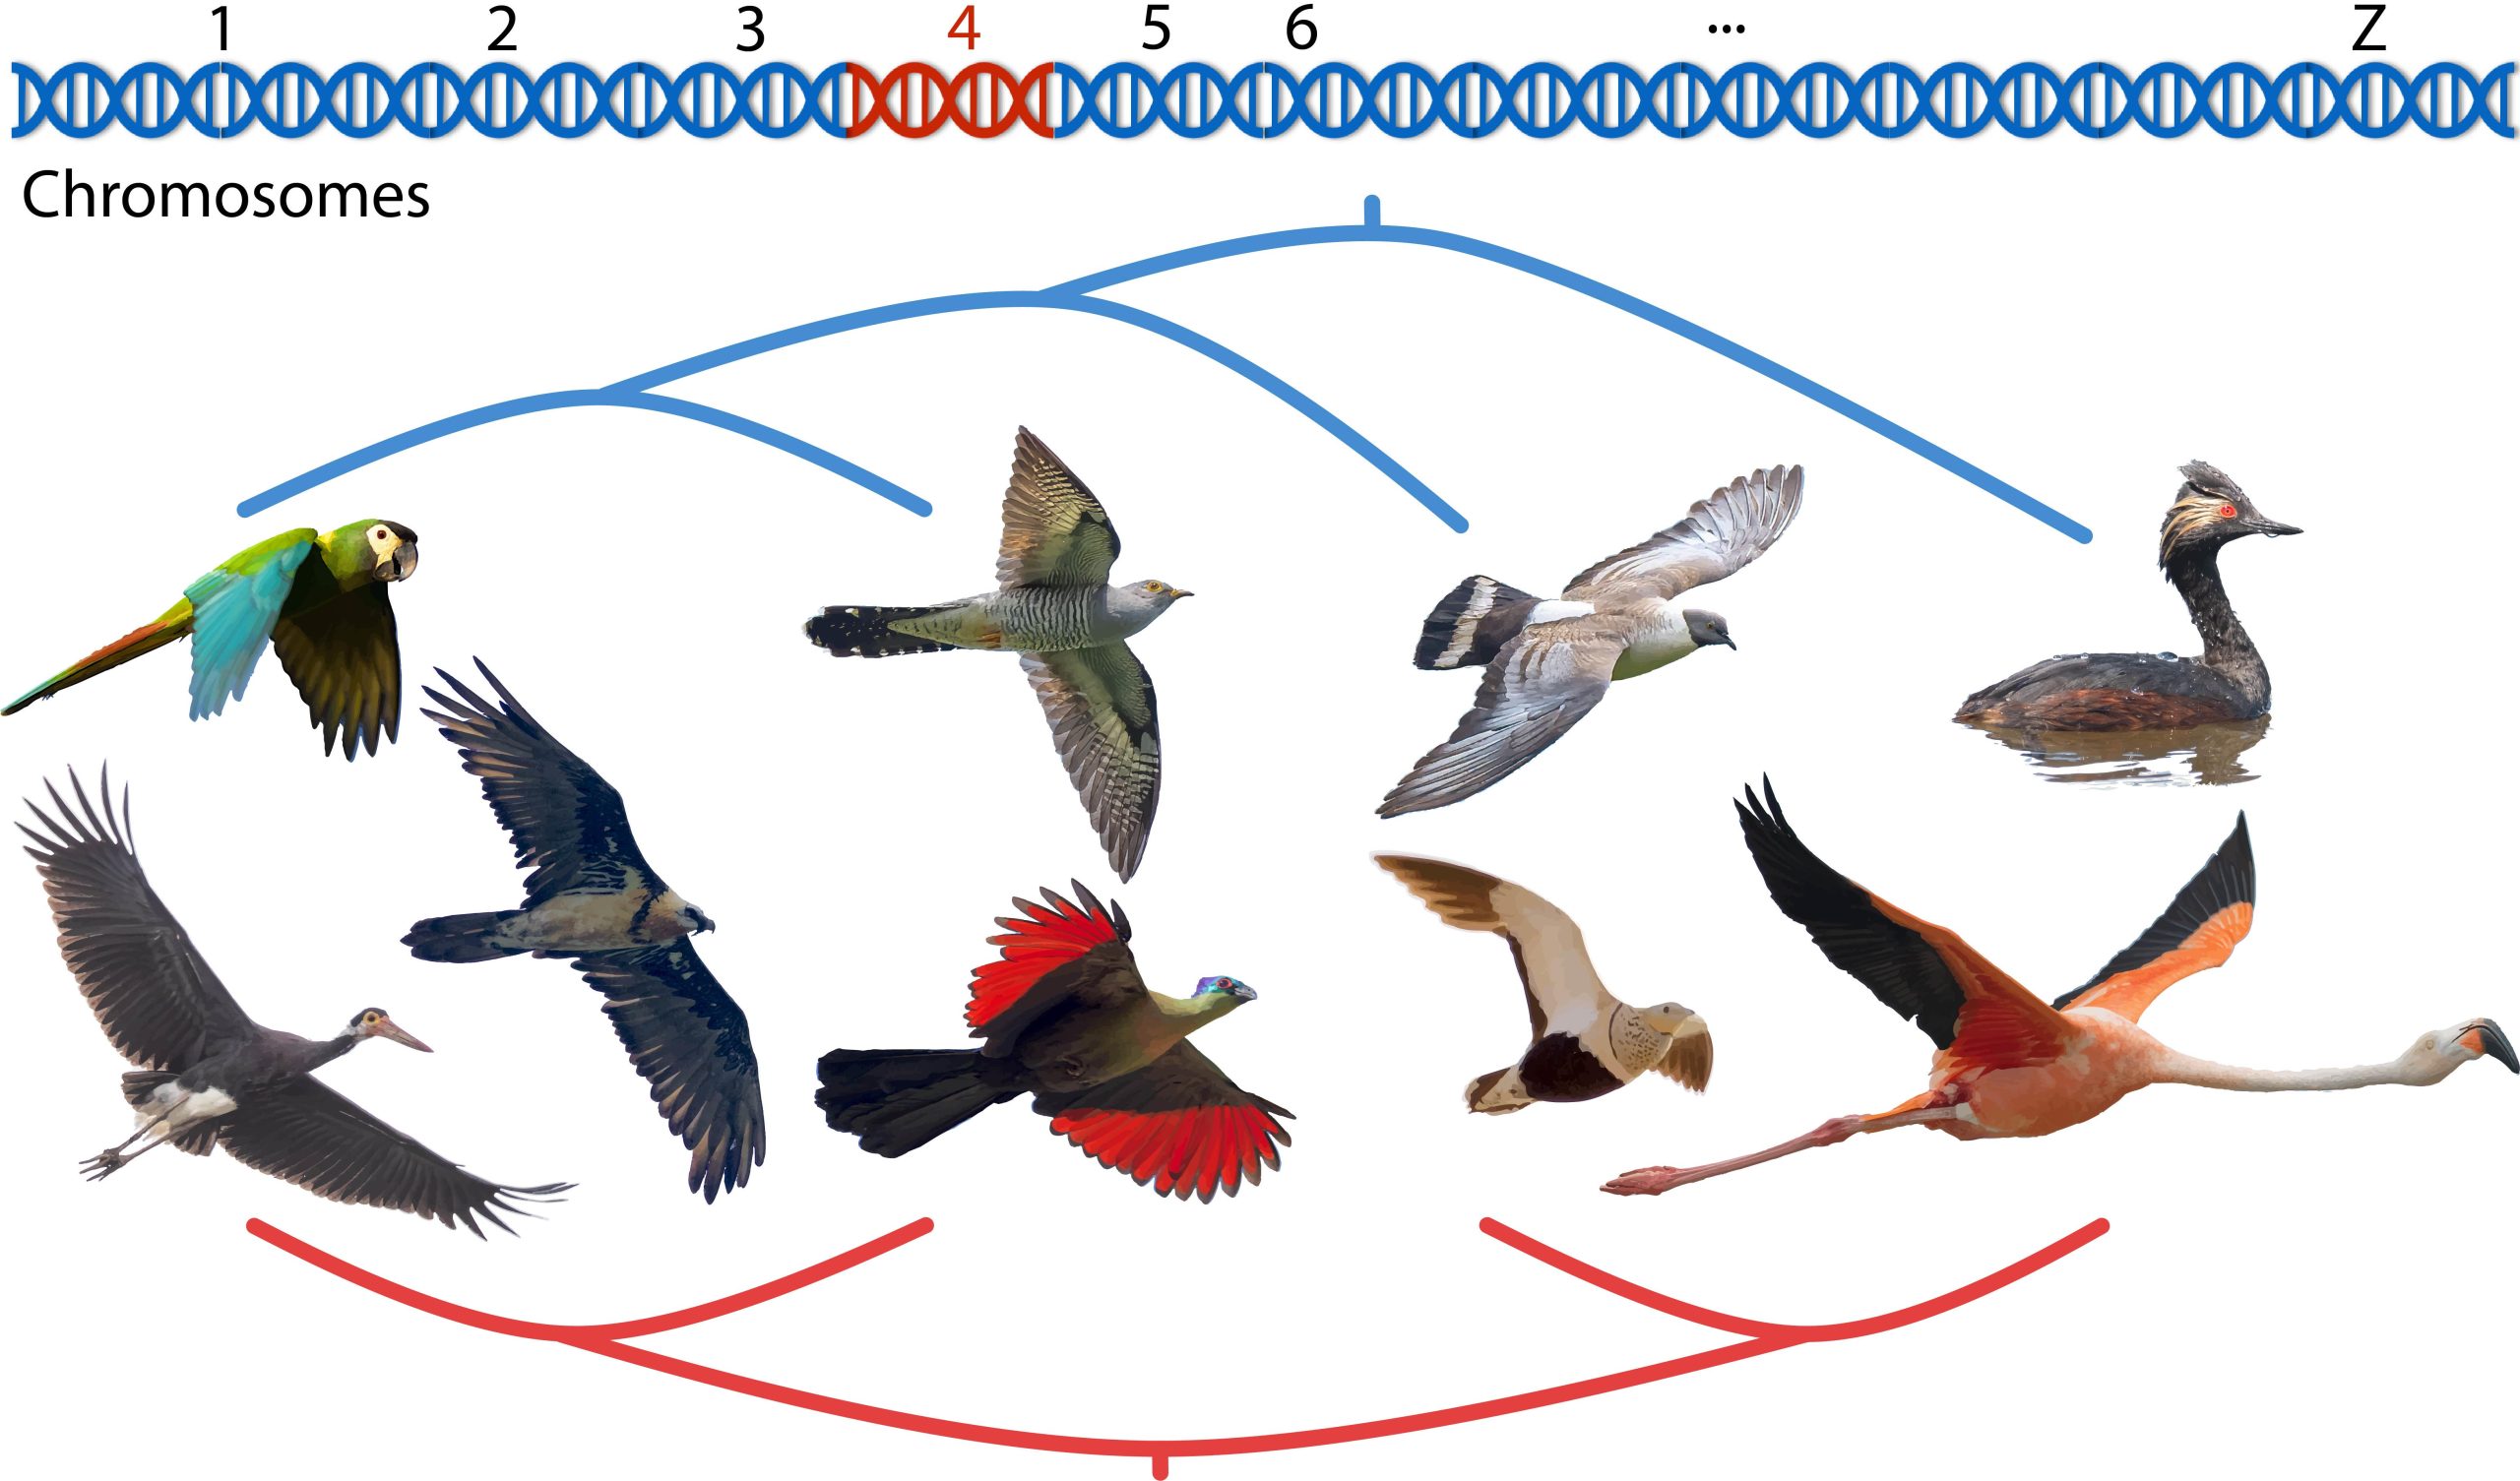 Chromosome-Section-Responsible-for-Evolutionary-Grouping-of-Flamingos-and-Doves-scaled.jpg